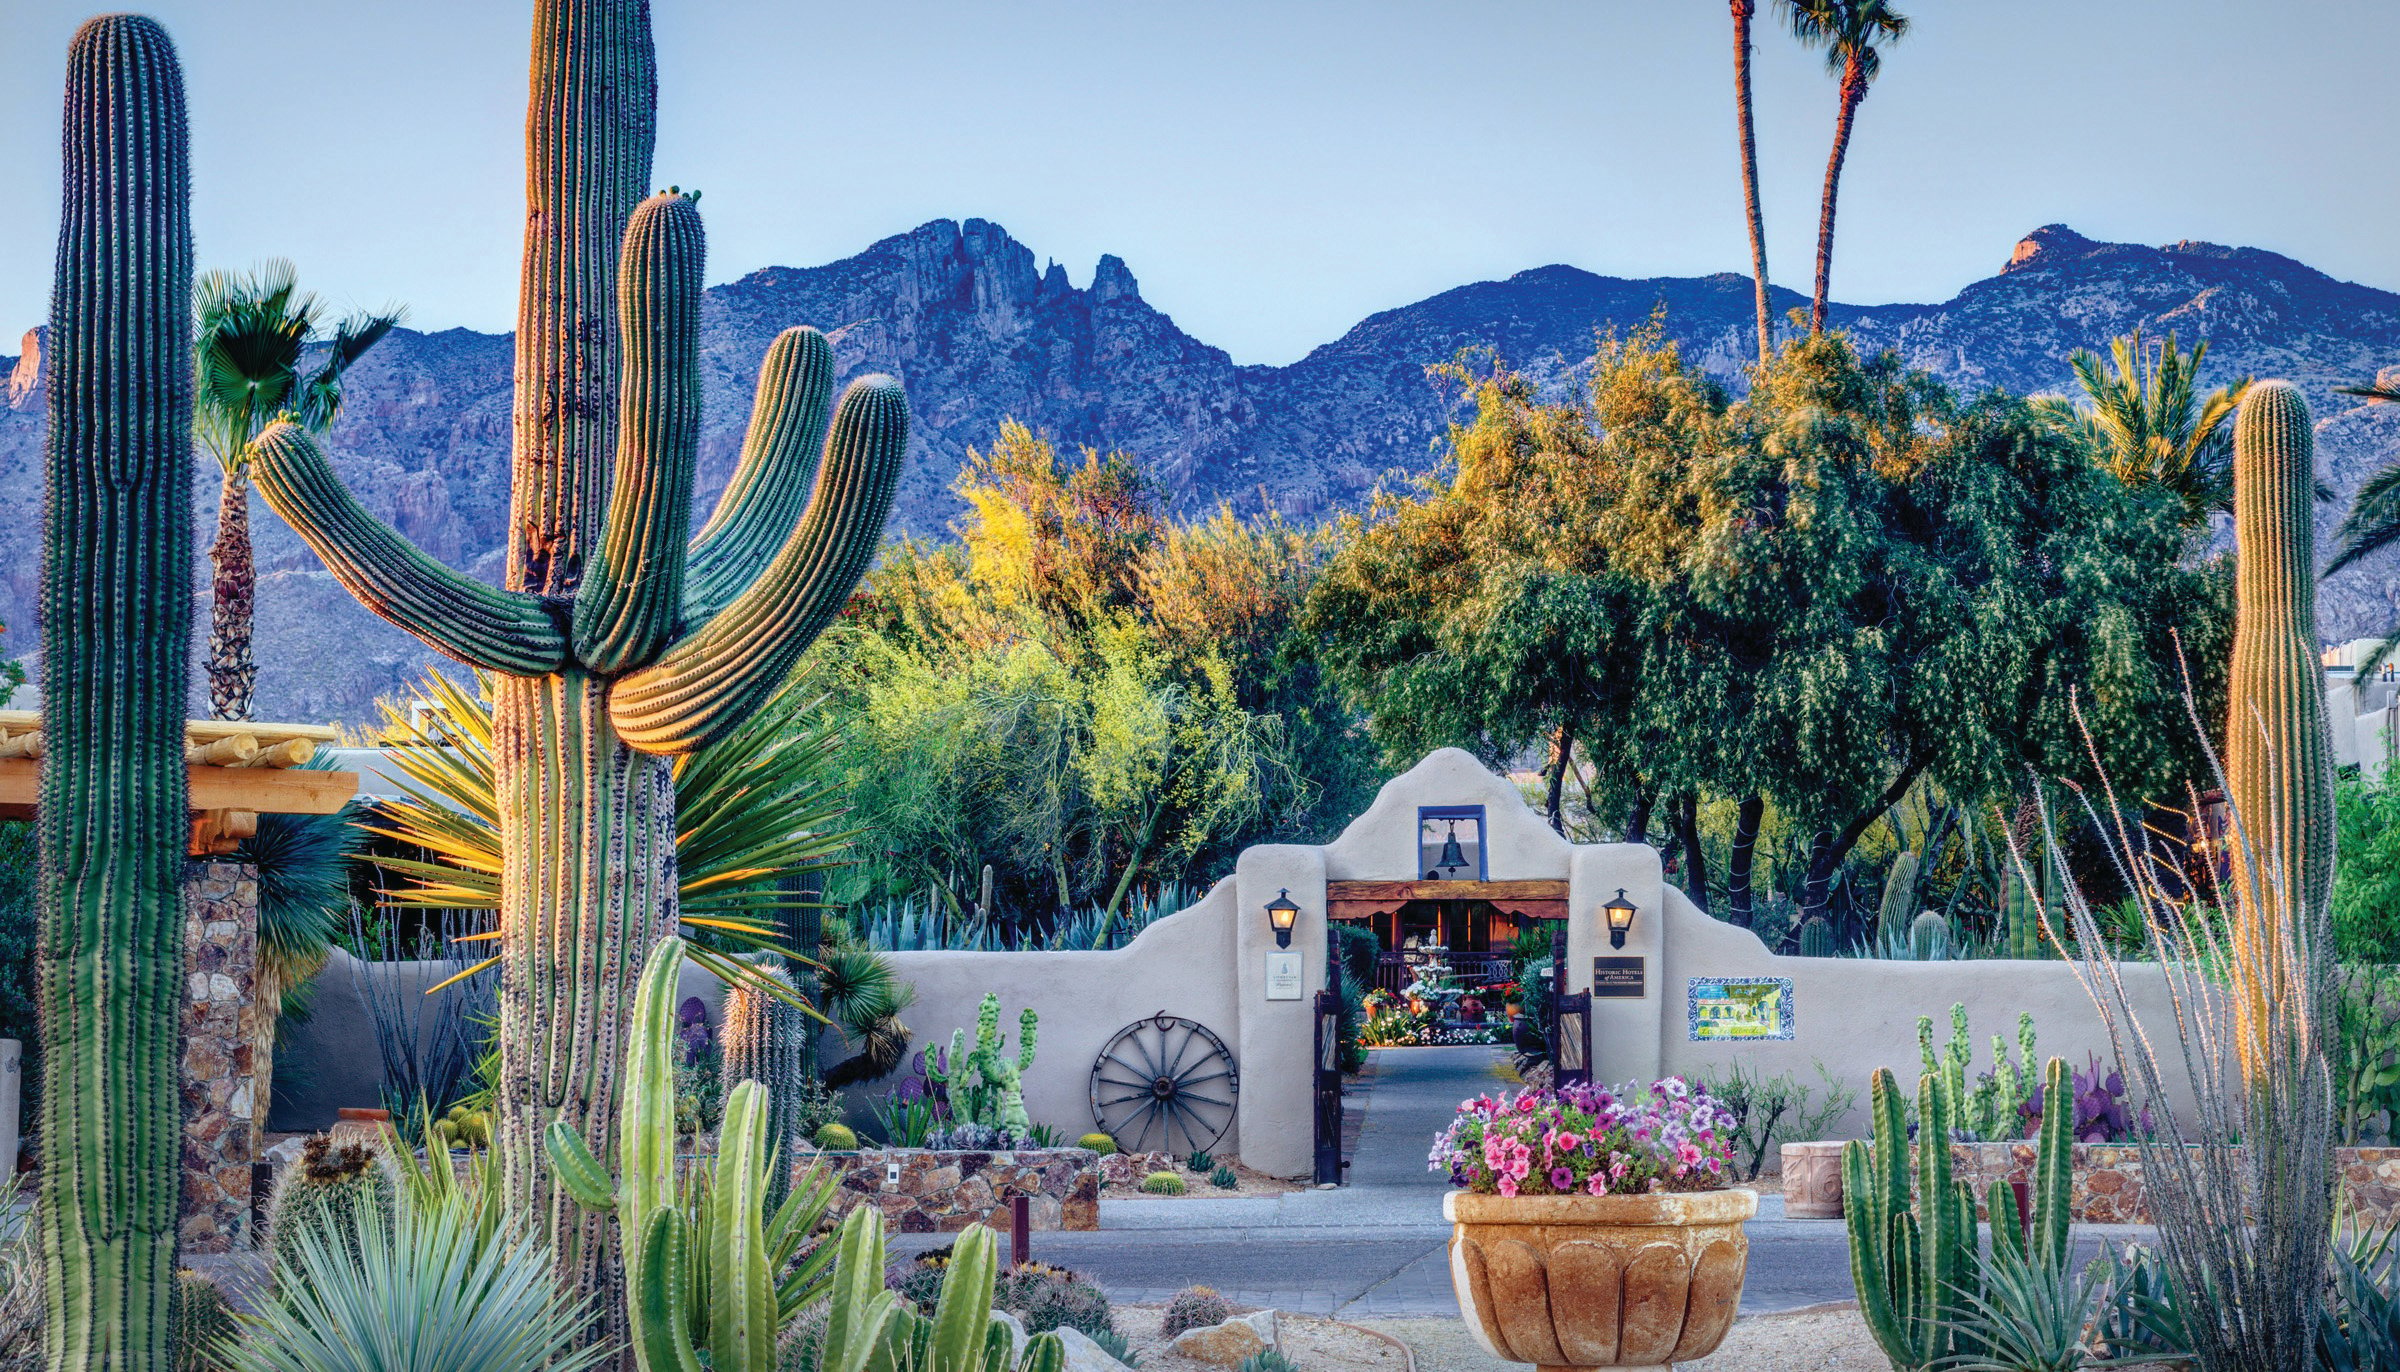 Looking for a surprising getaway? Go West